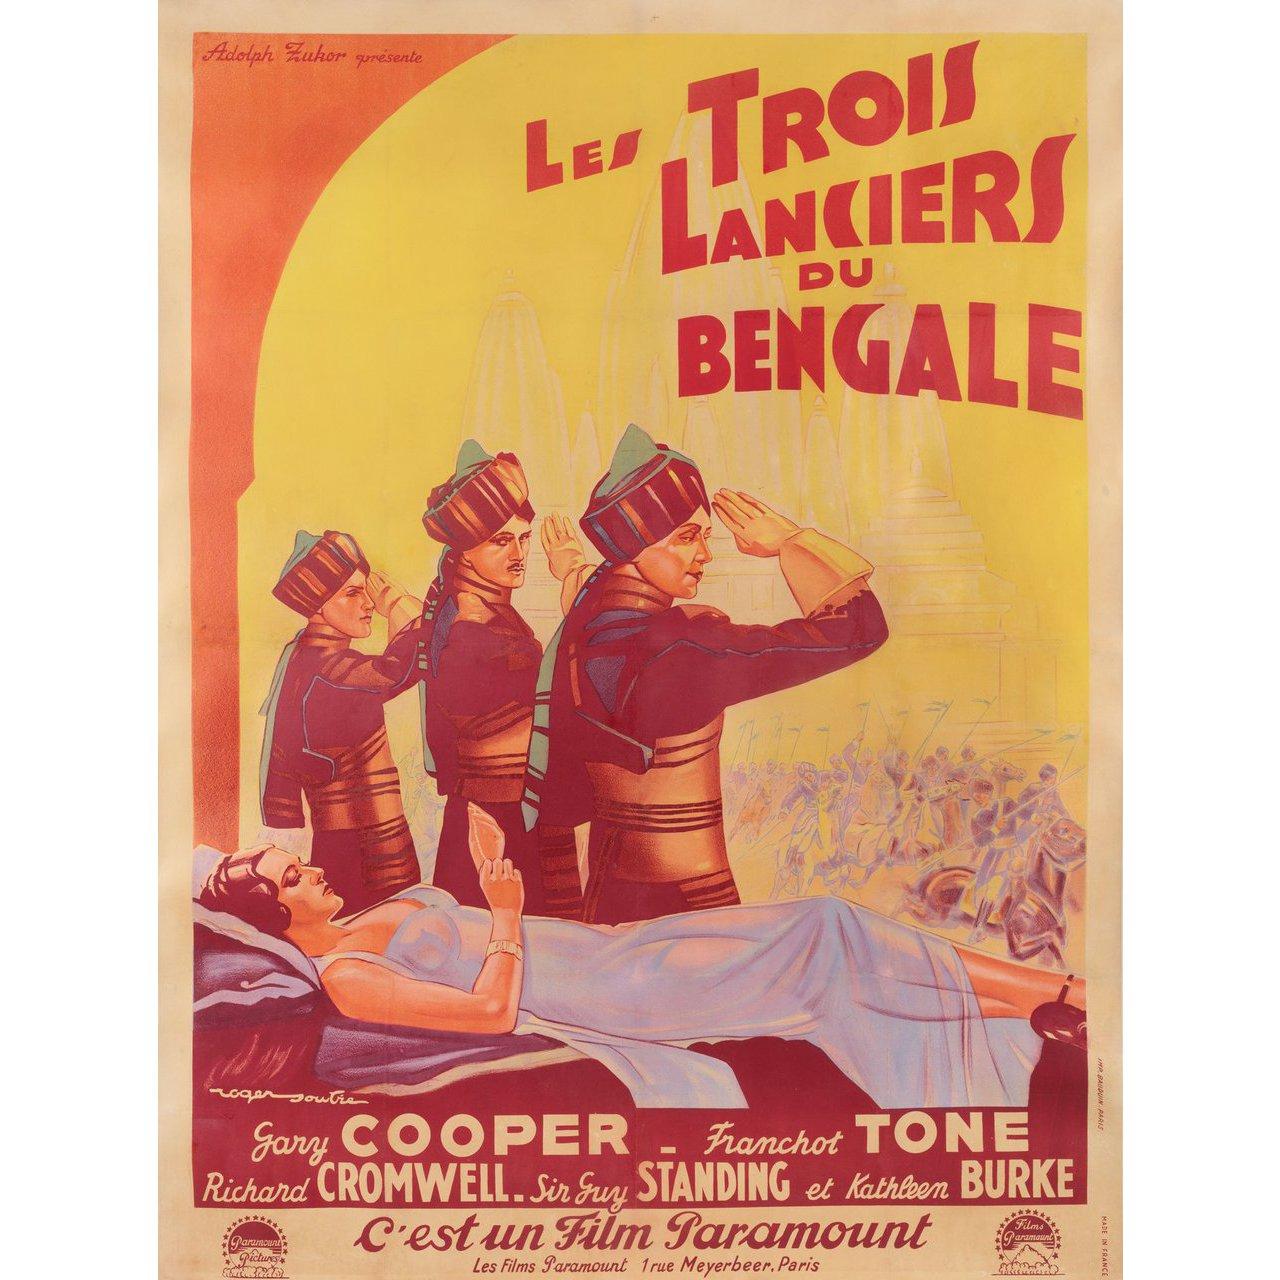 Original 1940s French grande poster by Roger Soubie for the first French theatrical release of the 1935 film The Lives of a Bengal Lancer directed by Henry Hathaway with Gary Cooper / Franchot Tone / Richard Cromwell / Guy Standing. Fine condition,